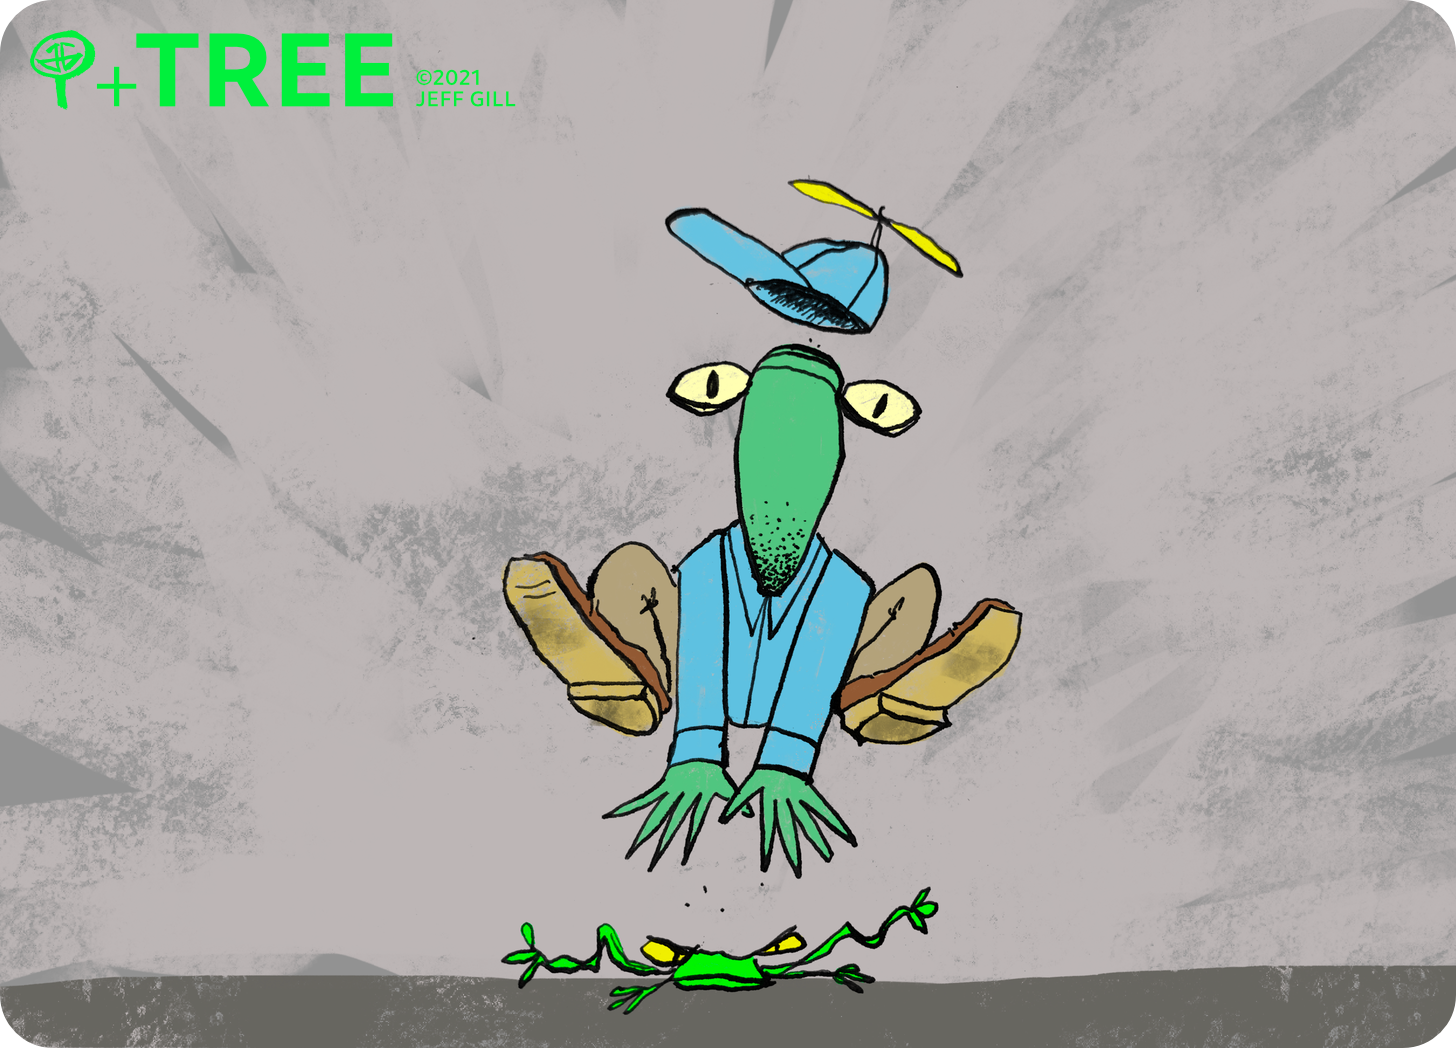 An impassive frog-like humanoid wearing khaki trousers, a blue button-up shirt and a blue baseball cap with a propeller on top leapfrogs over an actual frog, smashing the frog into the road. The frog is not happy.